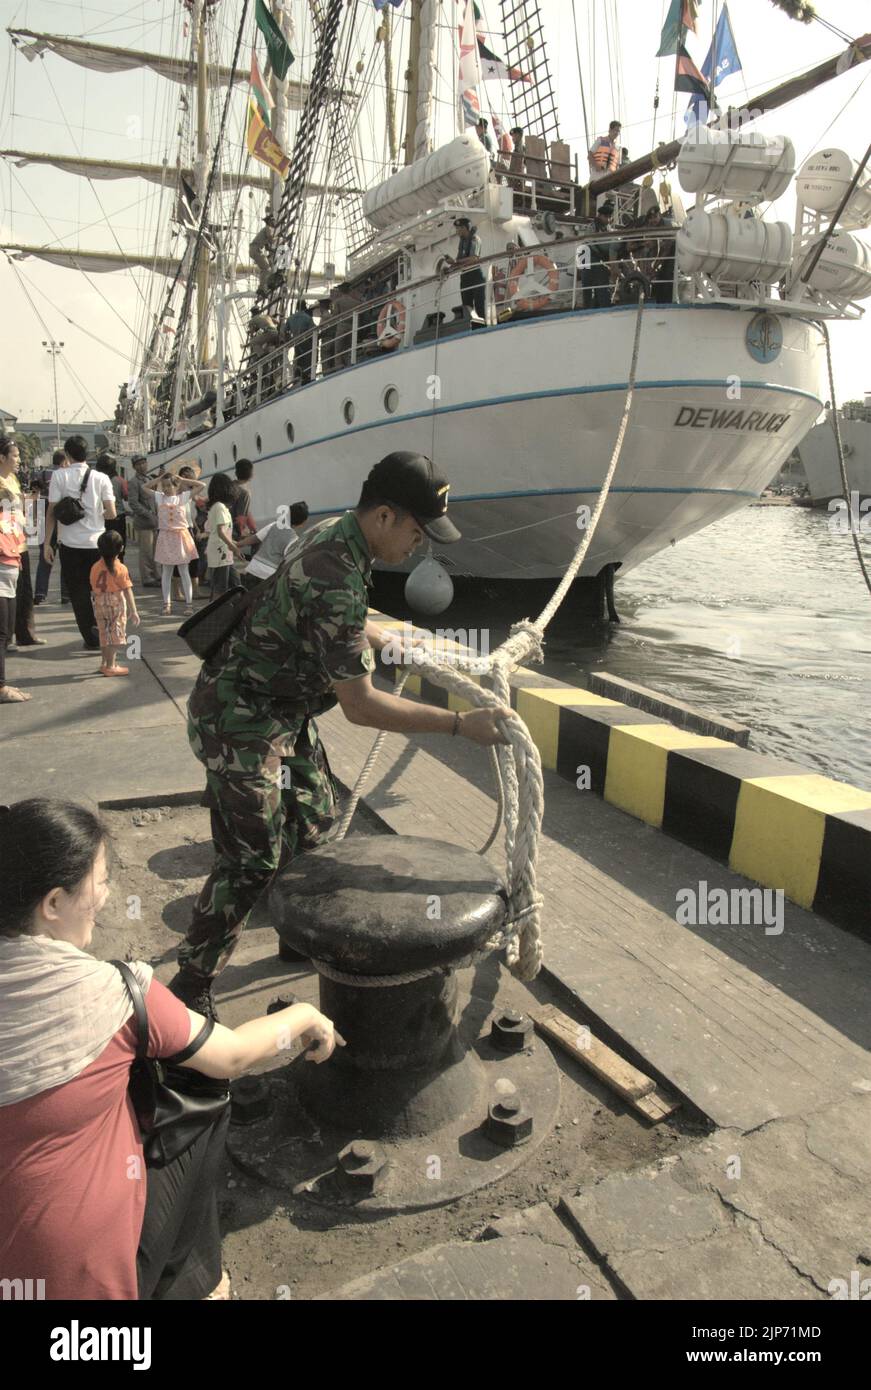 A military officer untying a rope of KRI Dewaruci (Dewa Ruci), an Indonesian tall ship, as it is setting up a sail after the barquentine type schooner being opened for public visitors at Kolinlamil harbour (Navy harbour) in Tanjung Priok, North Jakarta, Jakarta, Indonesia. Stock Photo